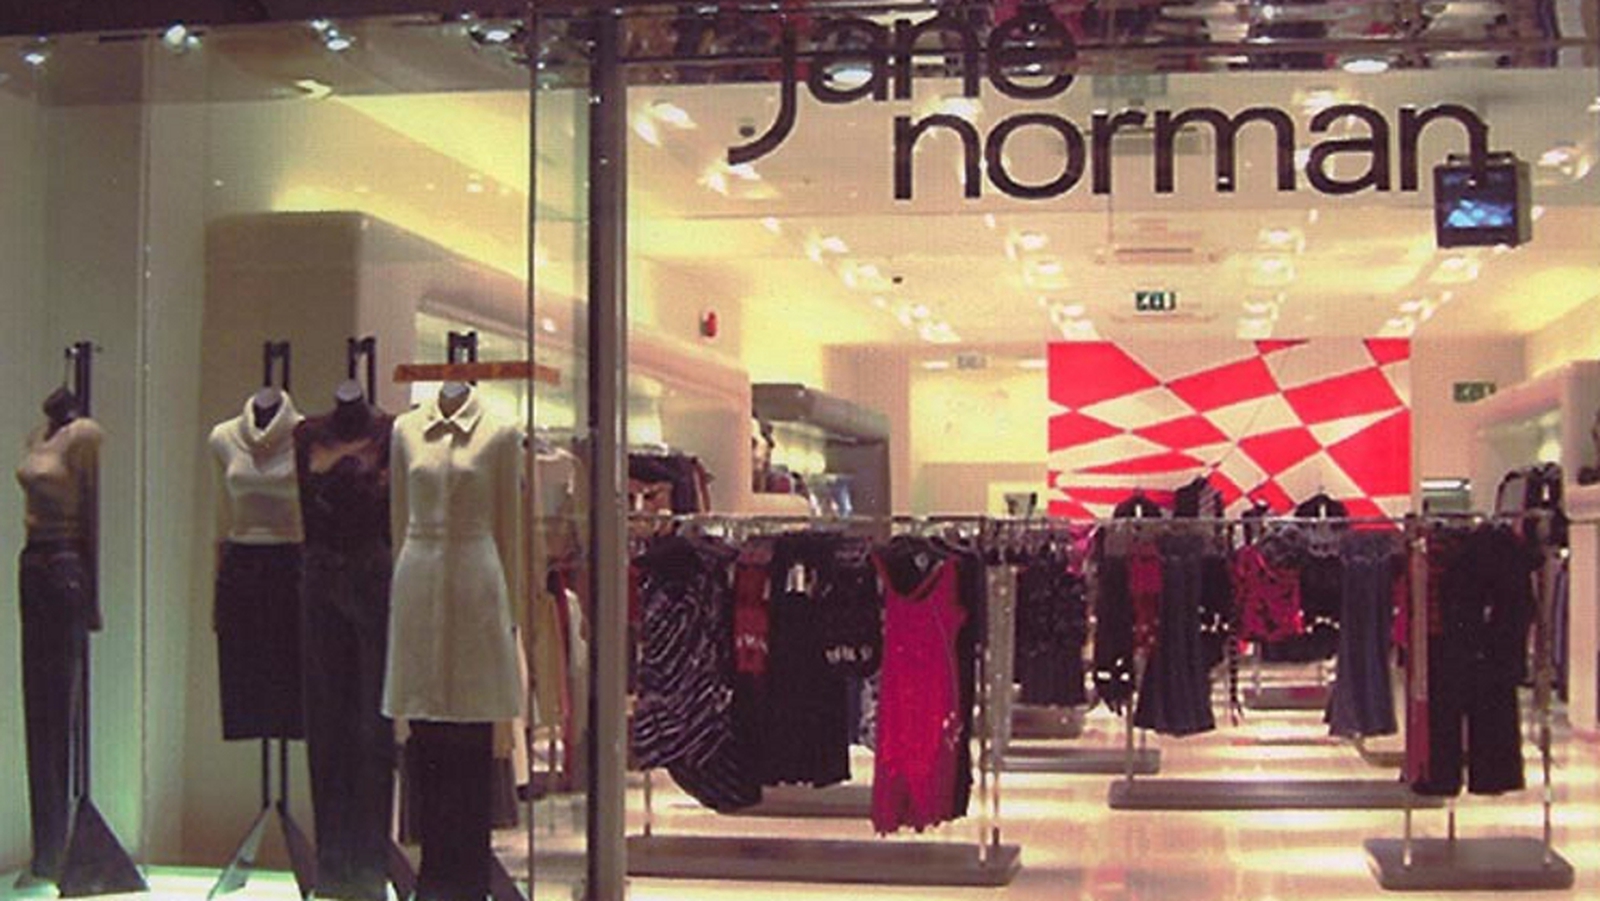 jane norman stores